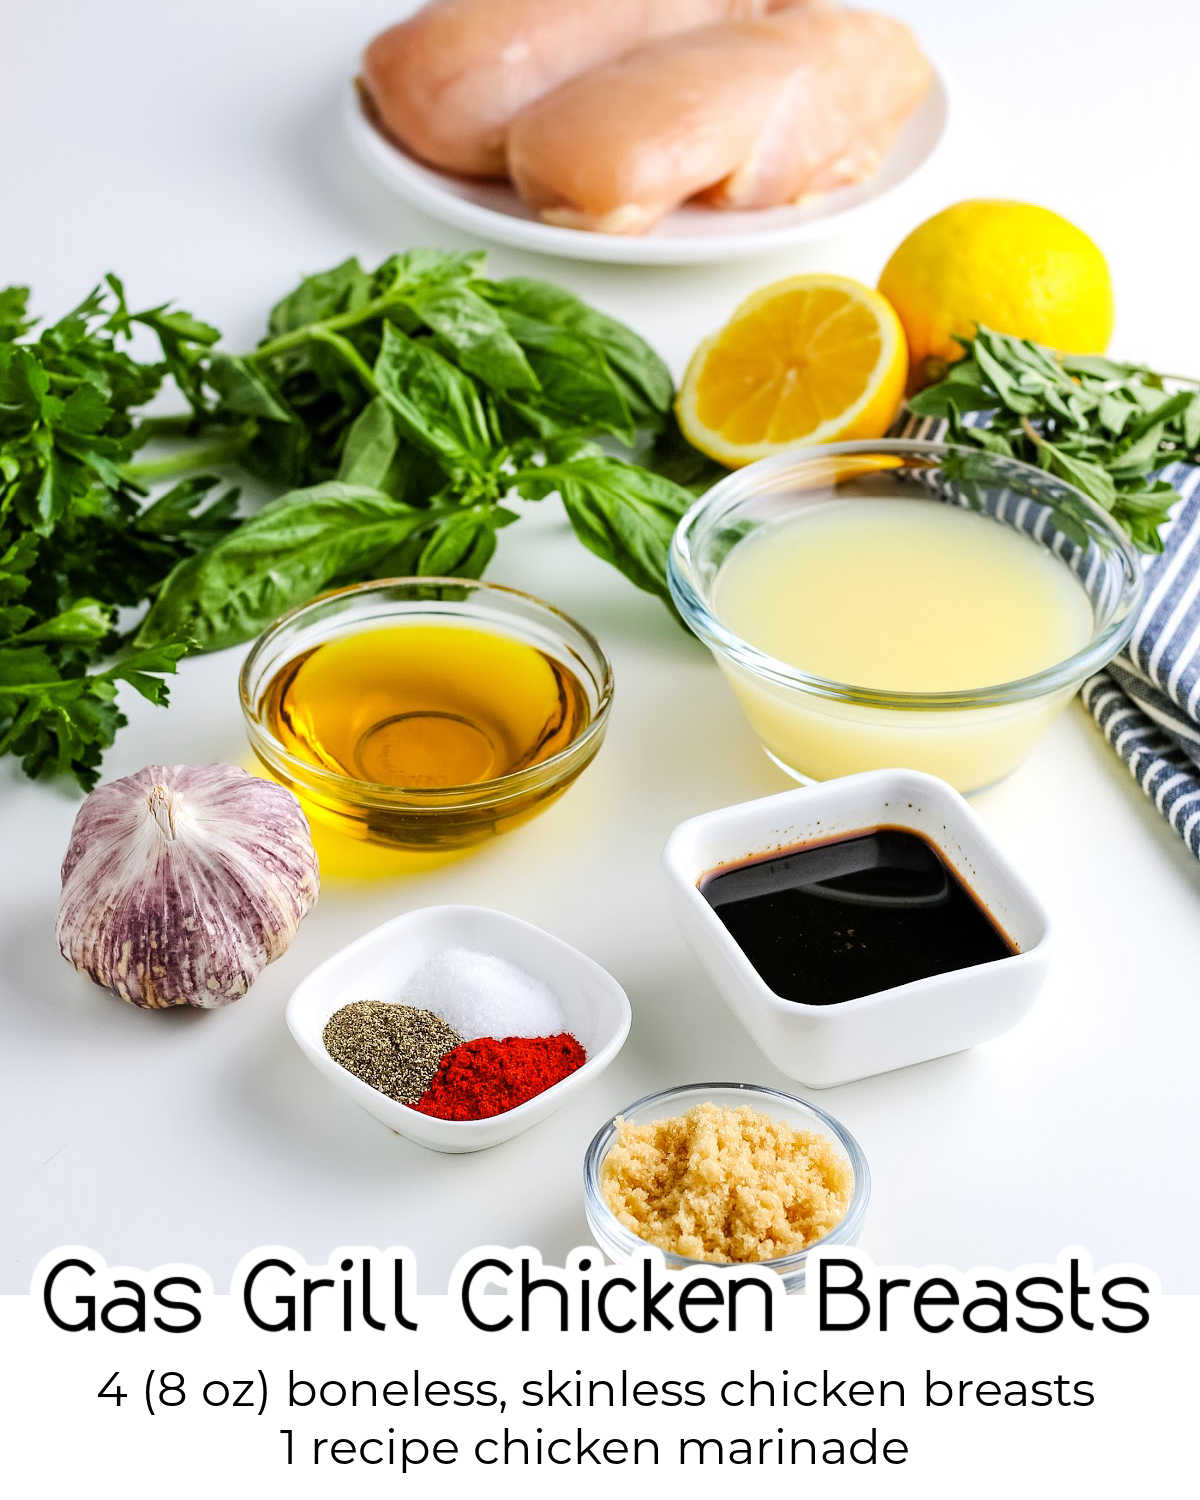 All of the ingredients needed to make this grilled chicken breast recipe.